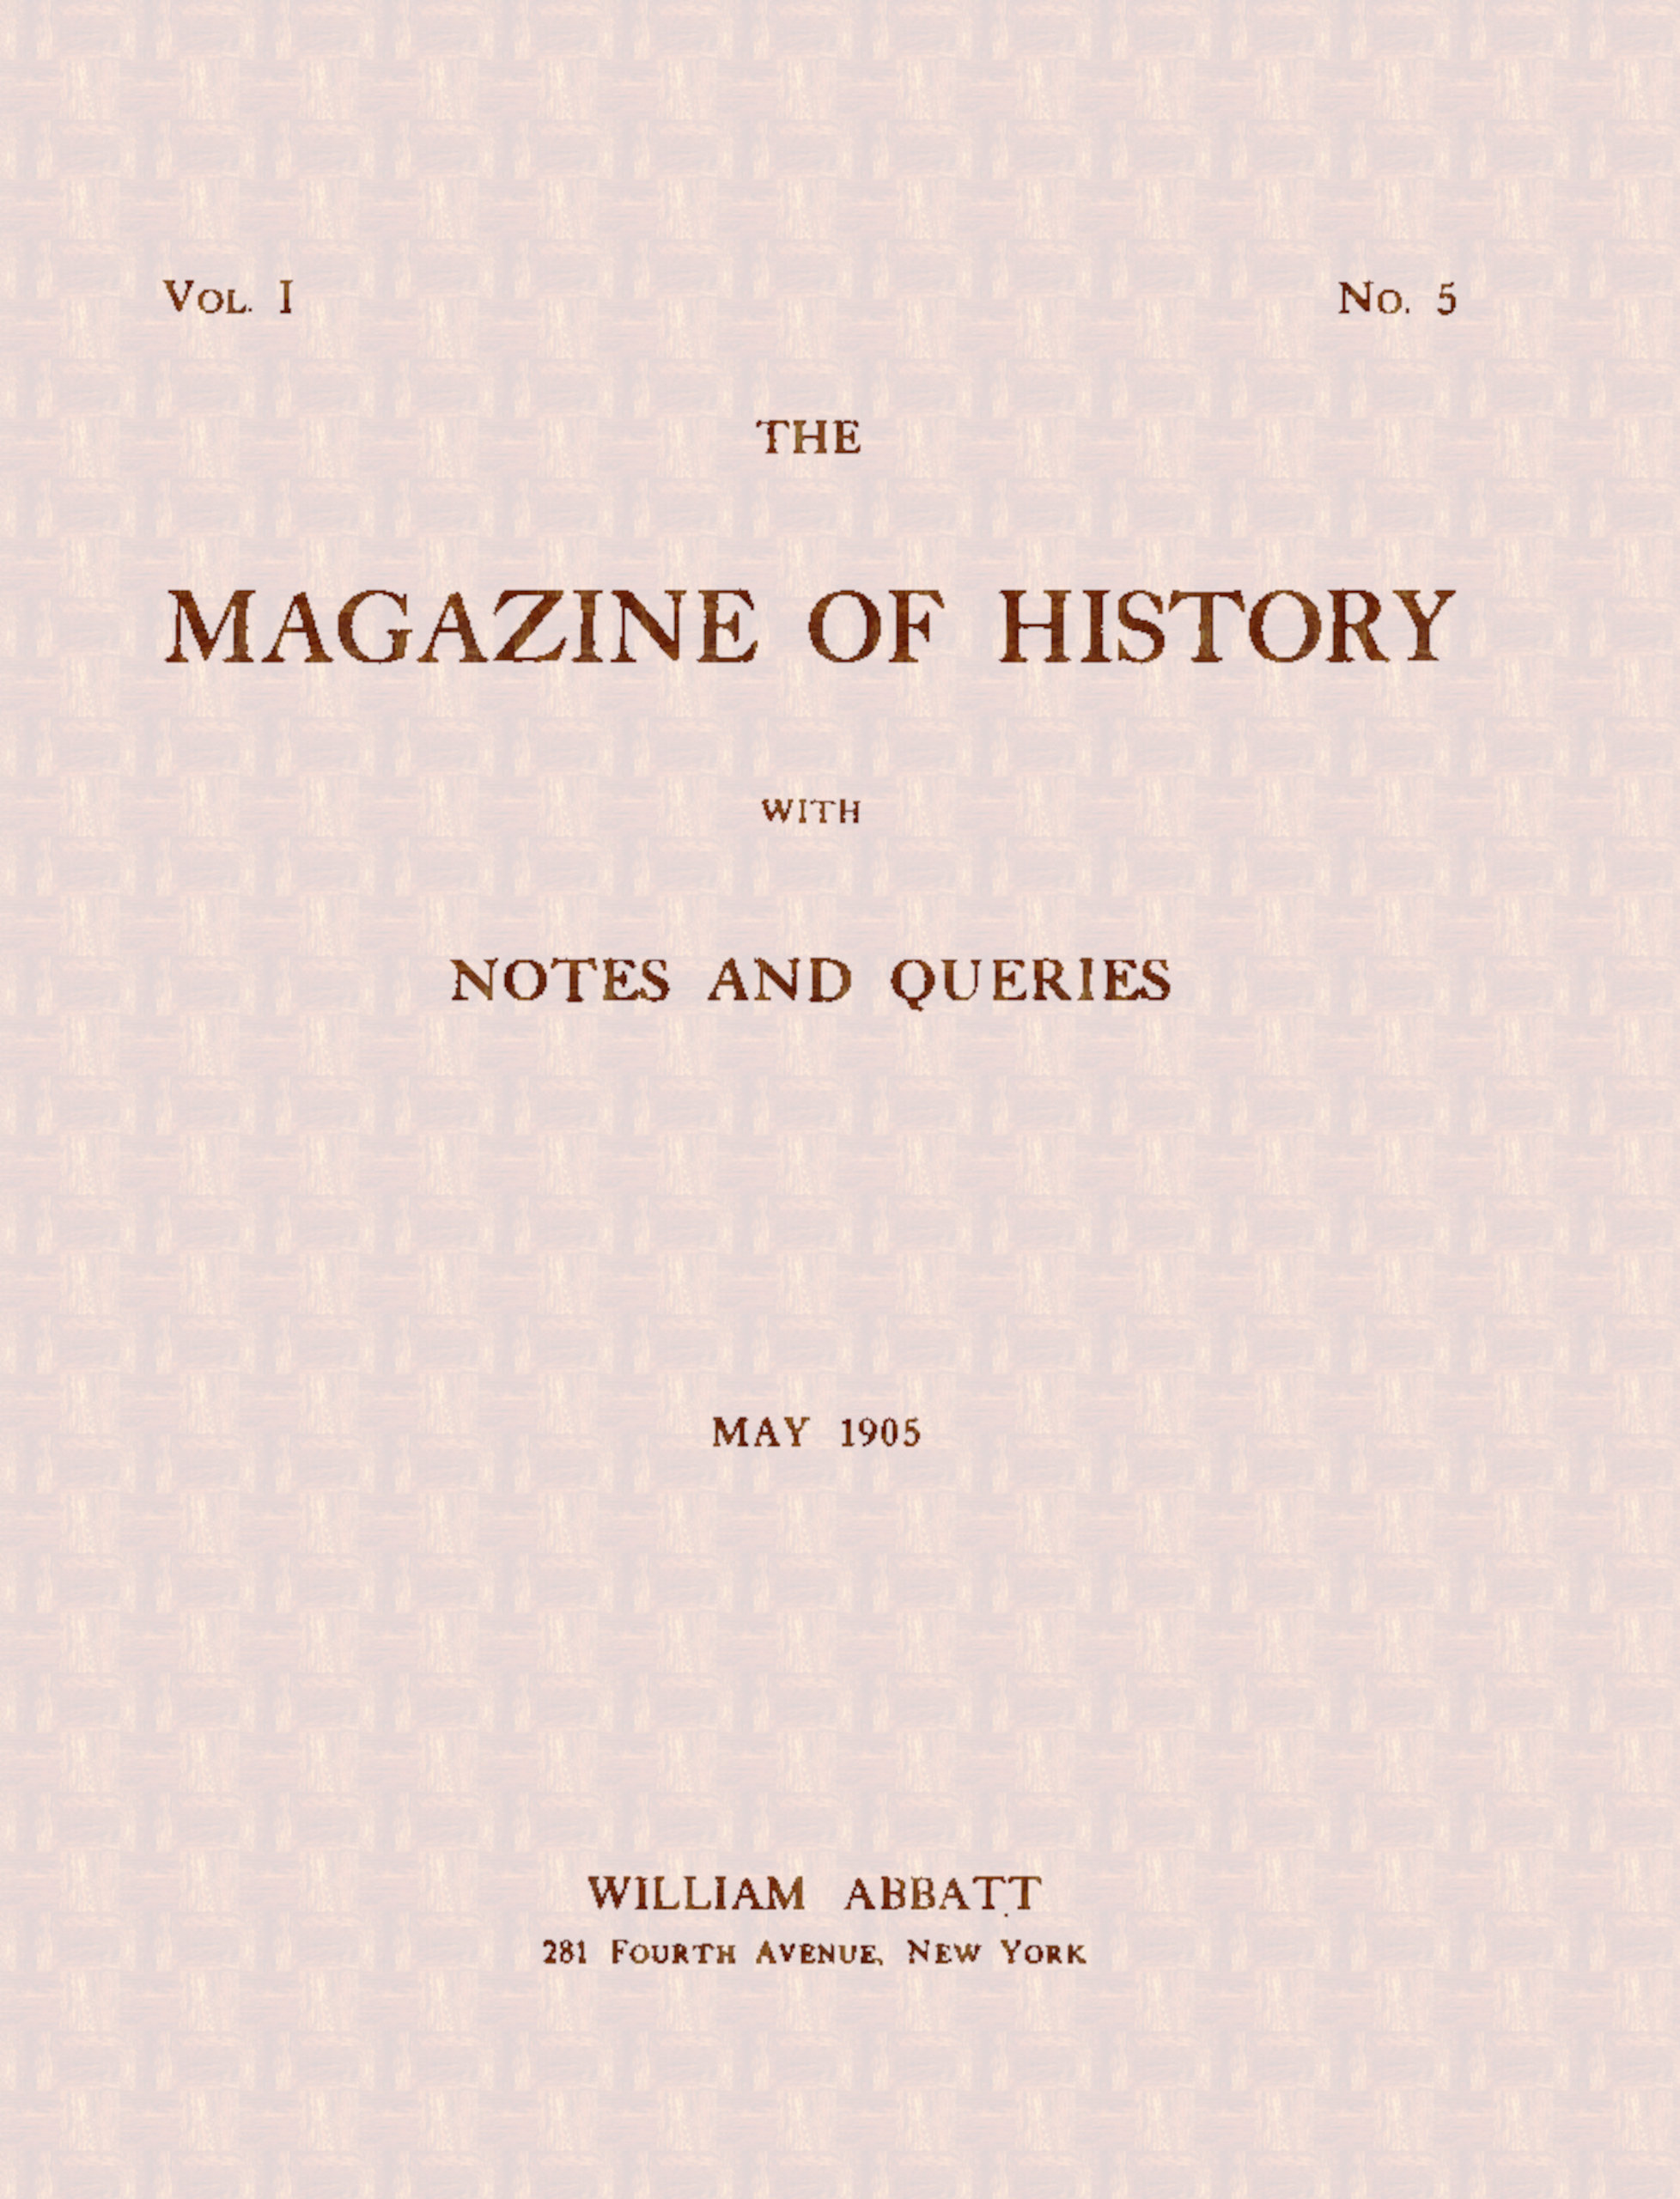 The magazine of history with notes and queries (Vol. I, No. 5, May 1905)